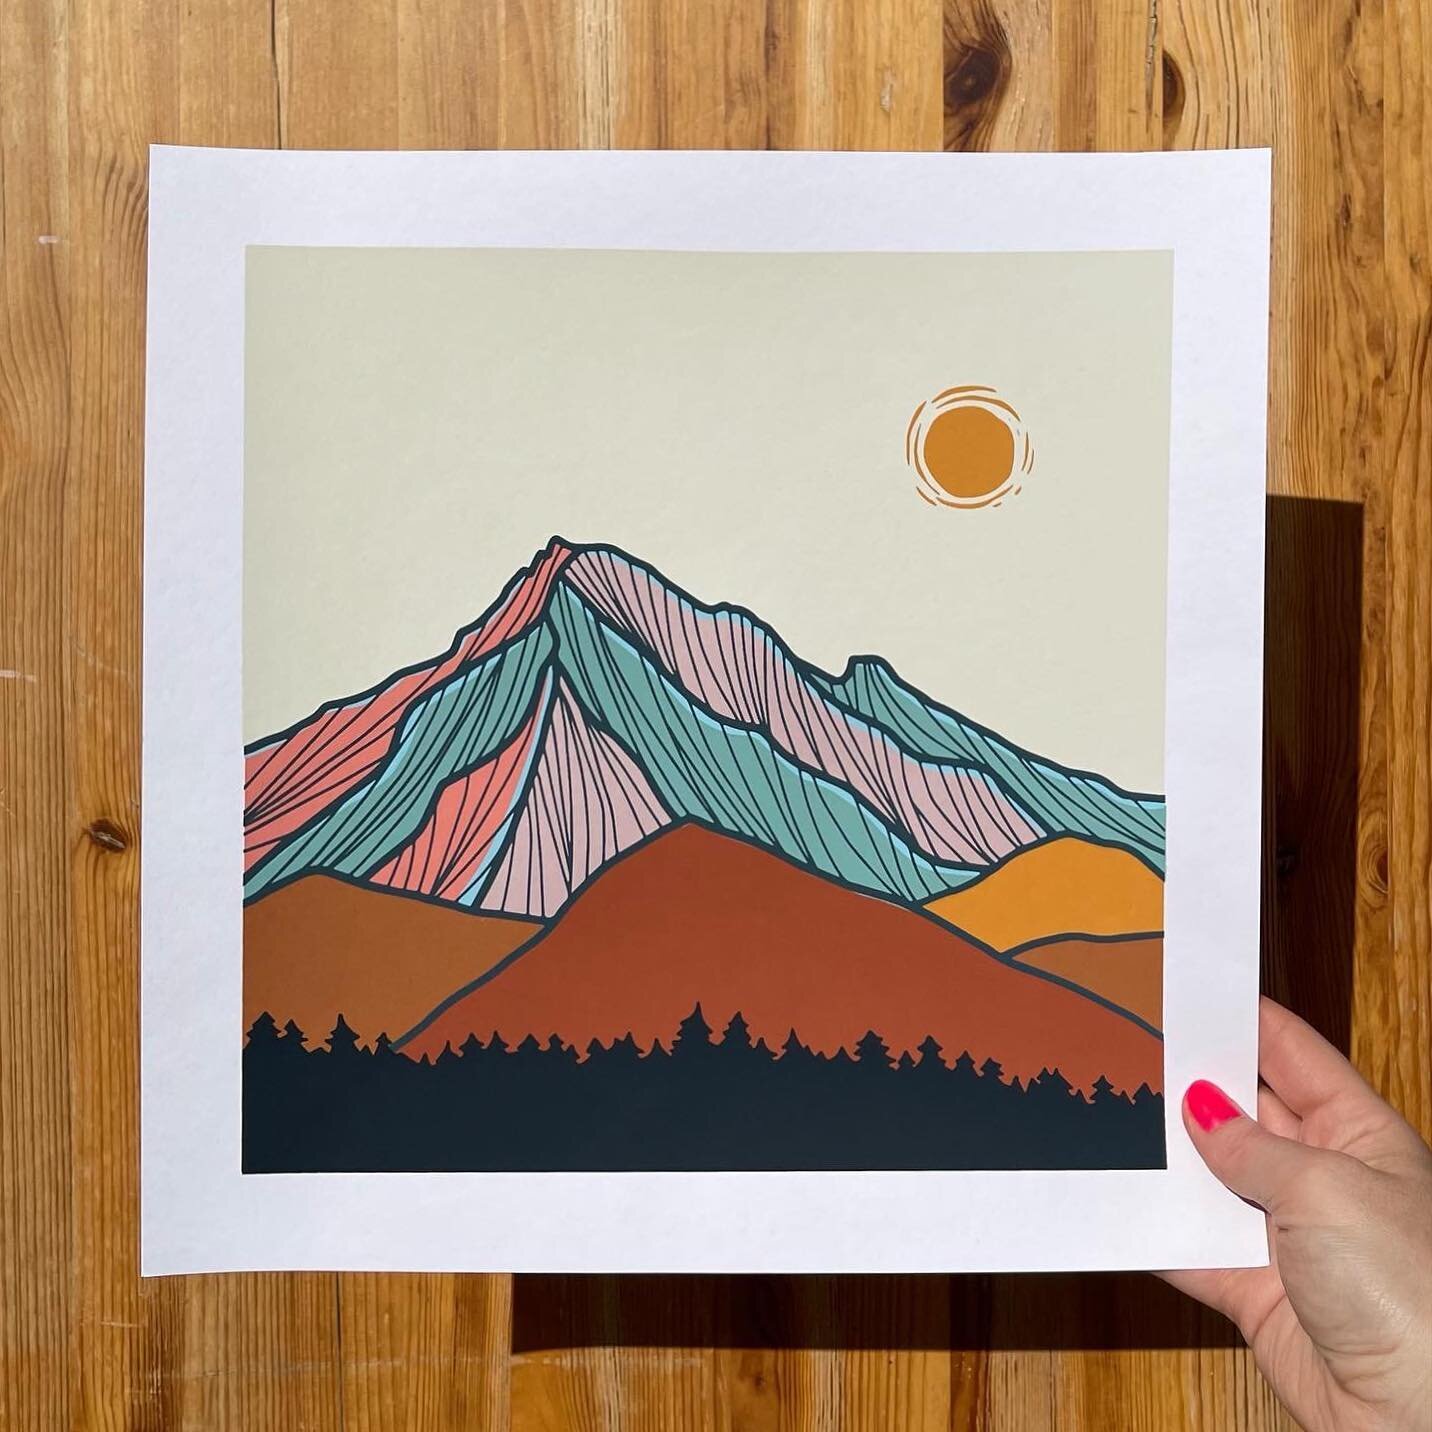 It&rsquo;s round 3 of the @portlandnightmarket (4-11p). The Mt Hood screen print has been a fan favorite so I&rsquo;m restocking the booth for another fun evening. See you soon! 🖤 
.
.
.
.
#printmaking #mthood #timberlinelodge #screenprint #handmade